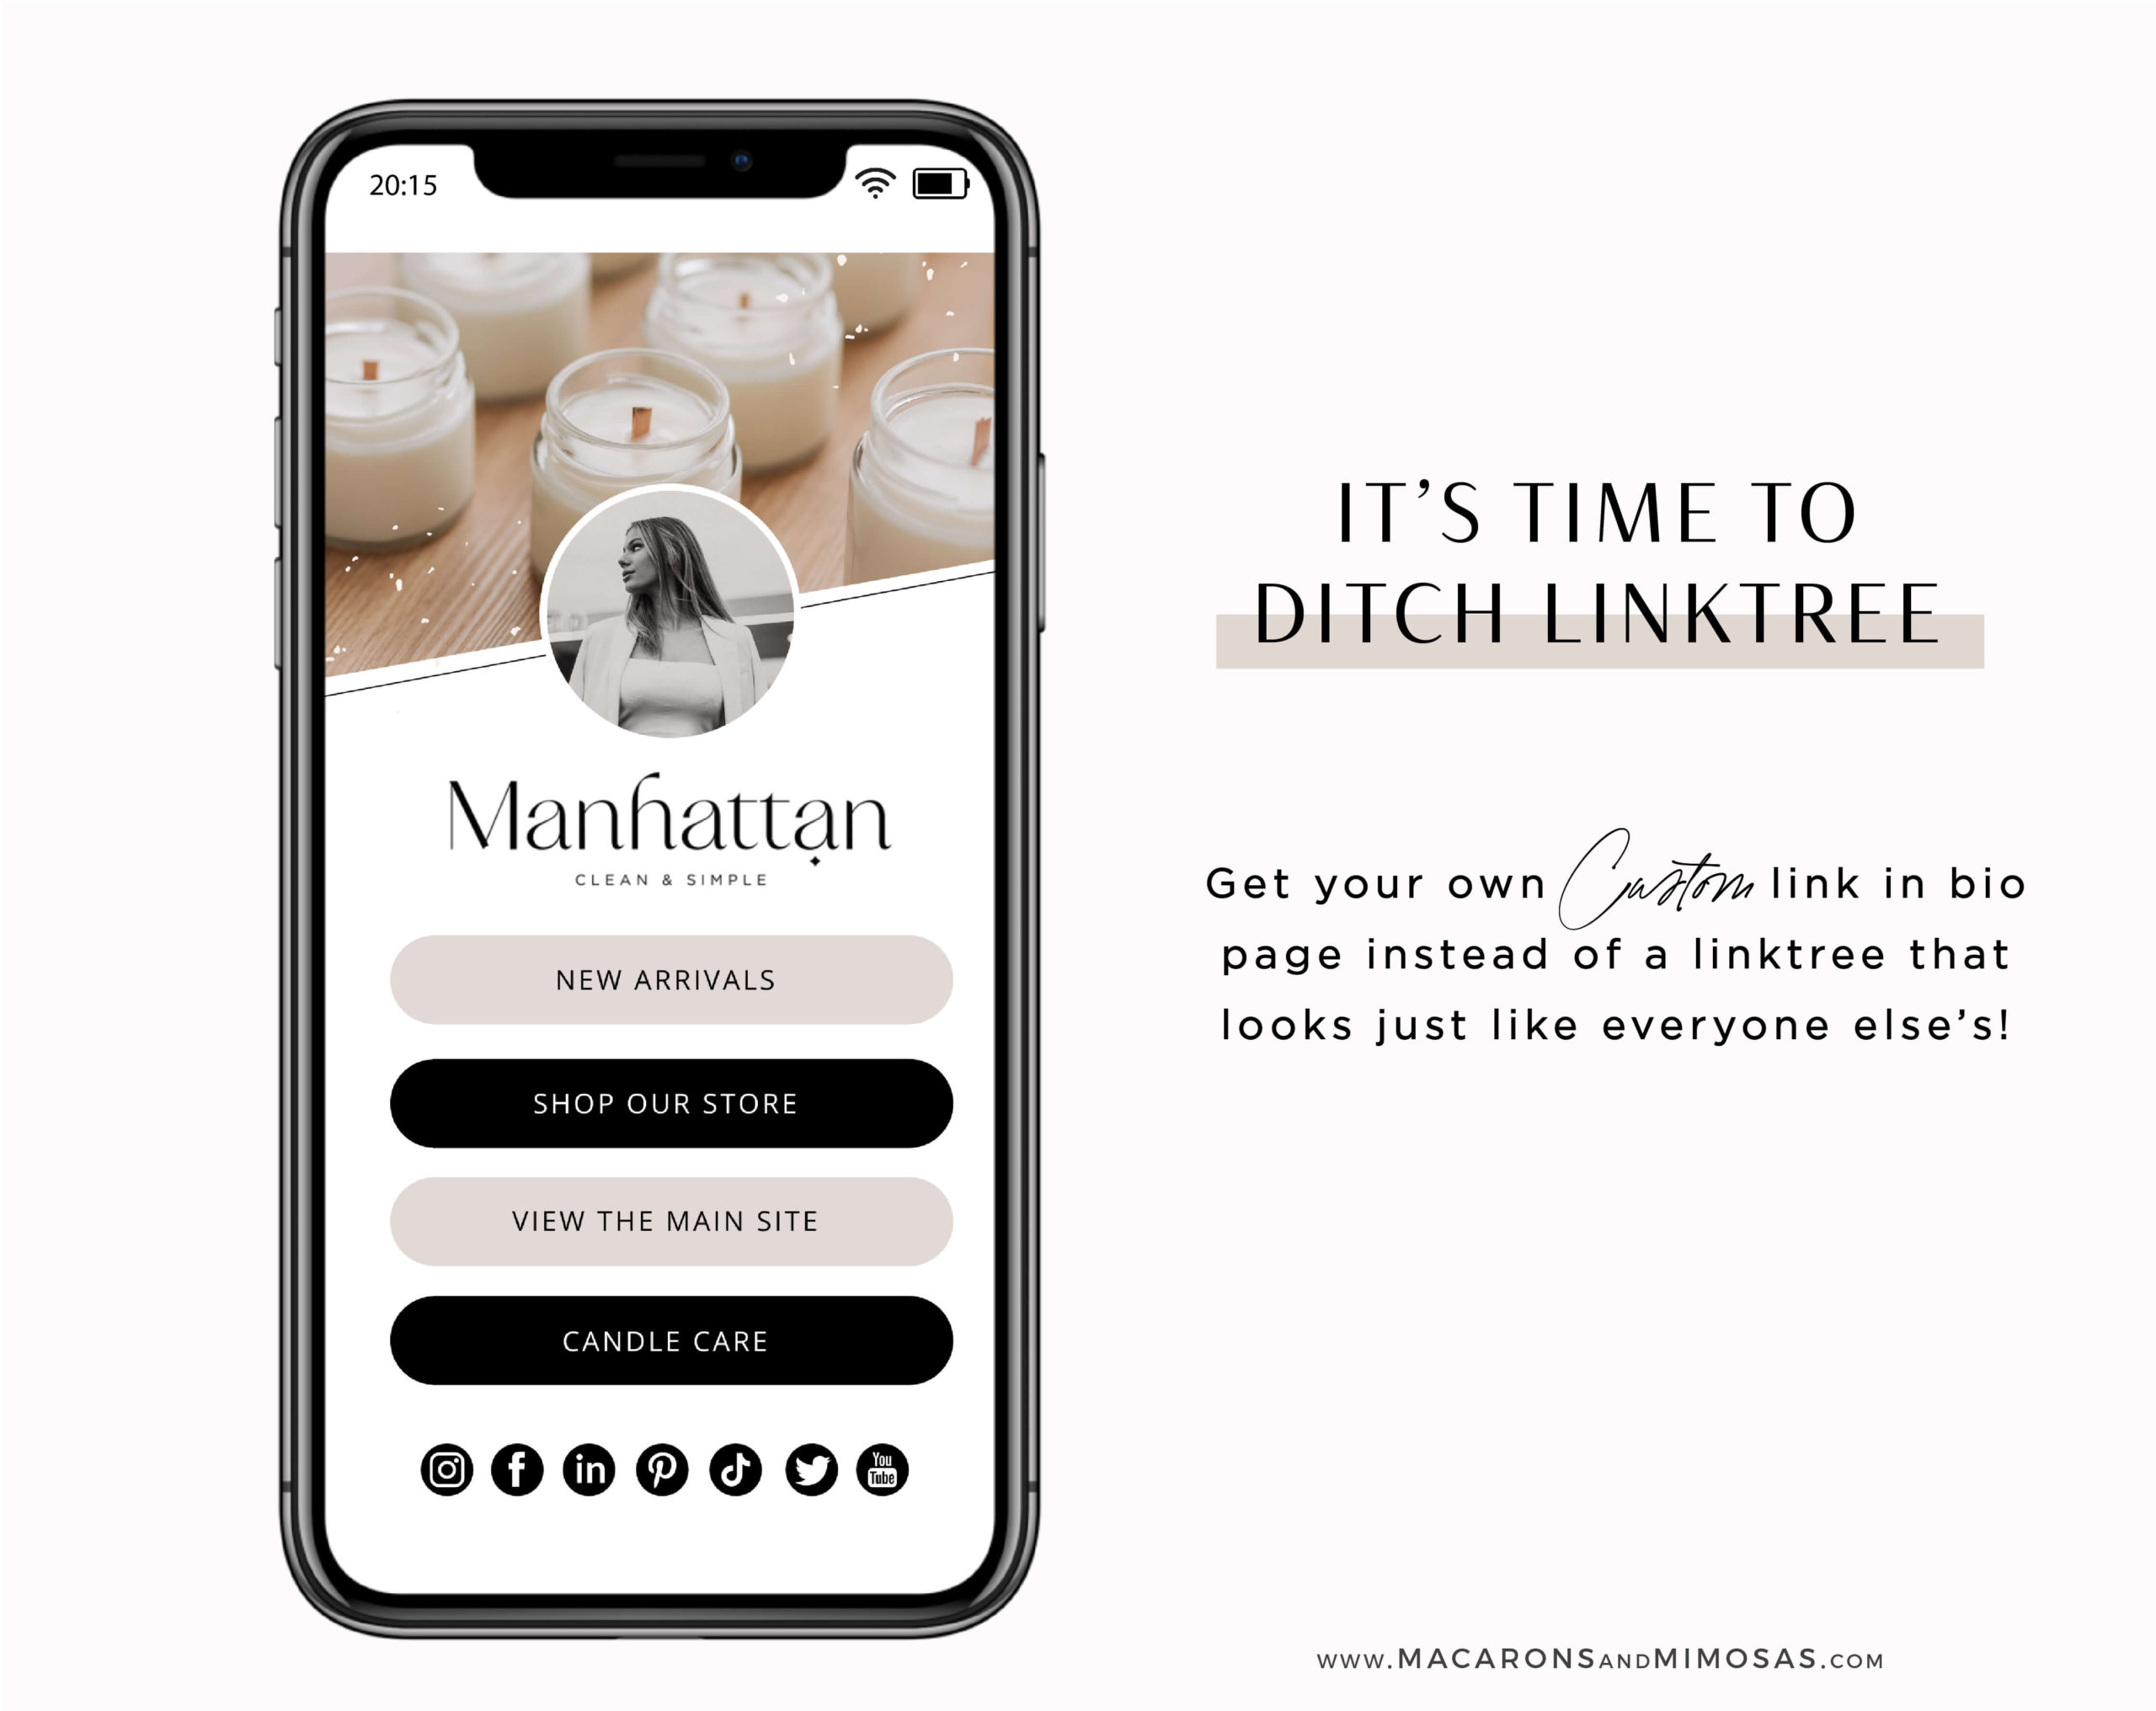 Modern candle company link in bio page template editable in canva with clickable links, digital business card Linktr.ee design